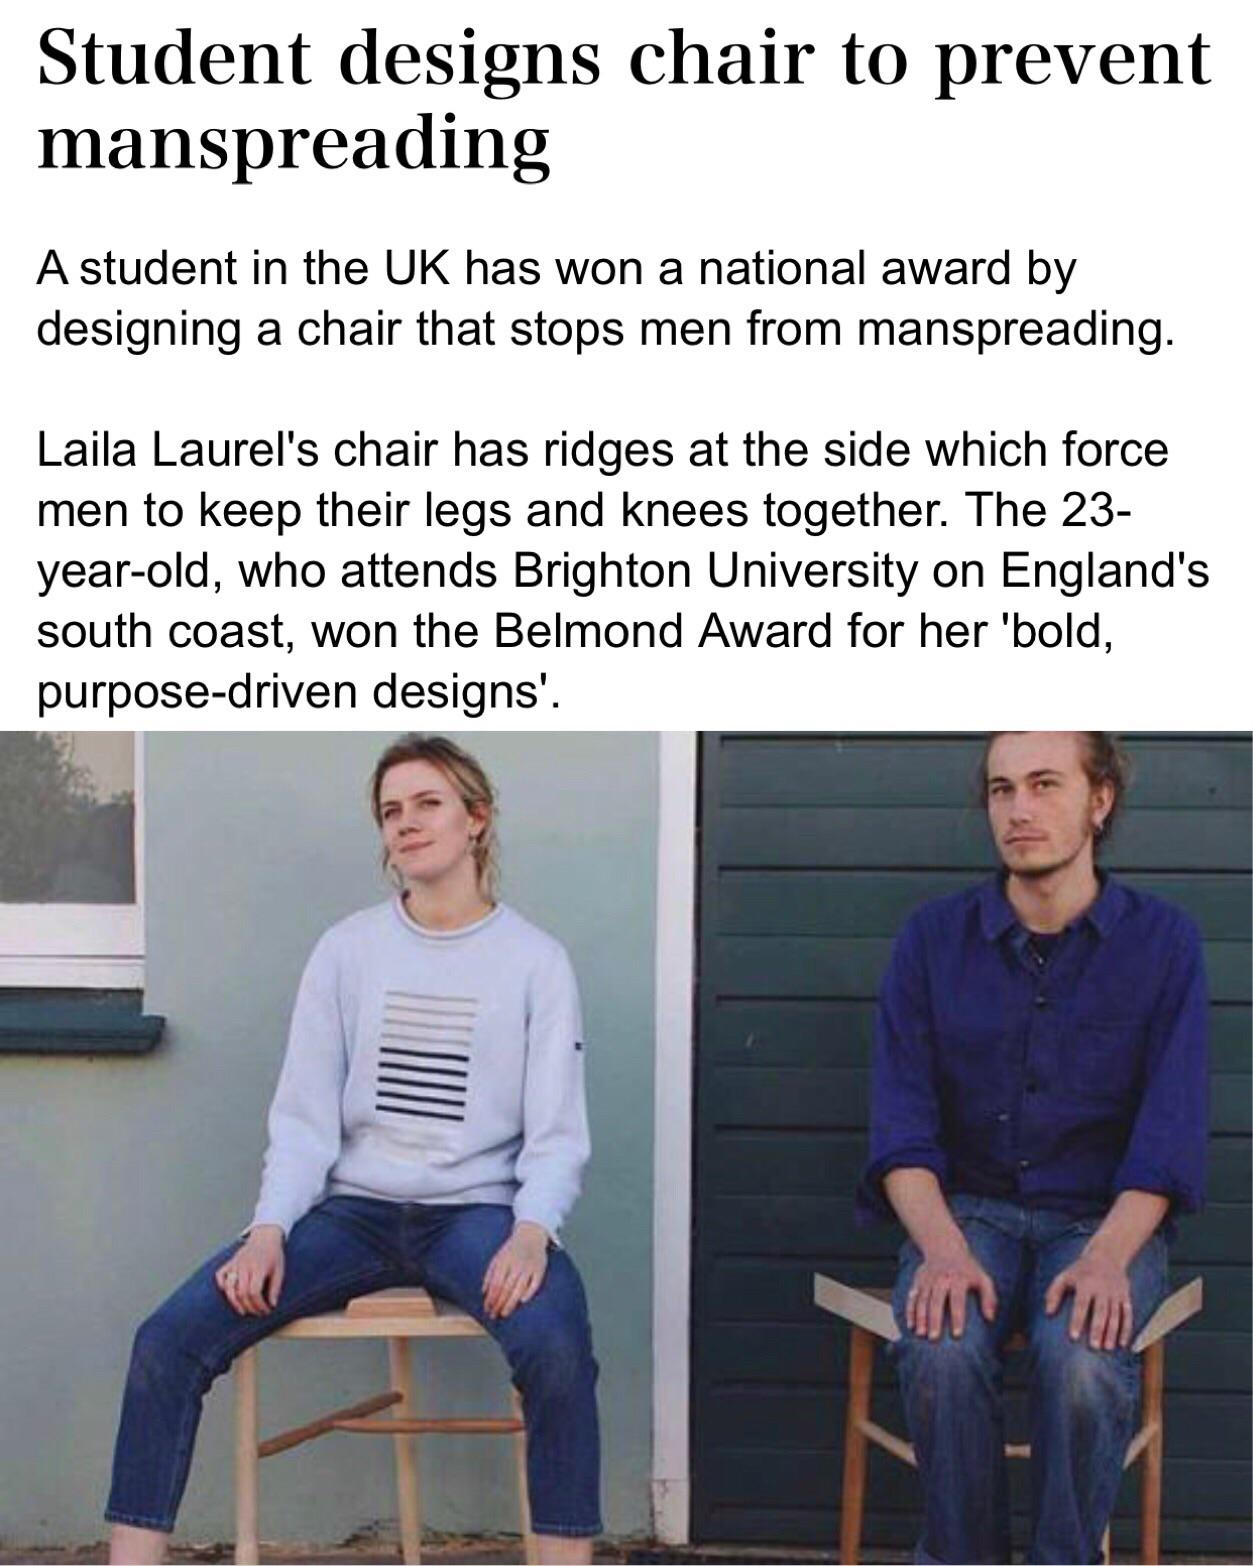 Student designs chair to prevent manspreading A student in the Uk has won a national award by designing a chair that stops men from manspreading. Laila Laurel's chair has ridges at the side which force men to keep their legs and knees together.